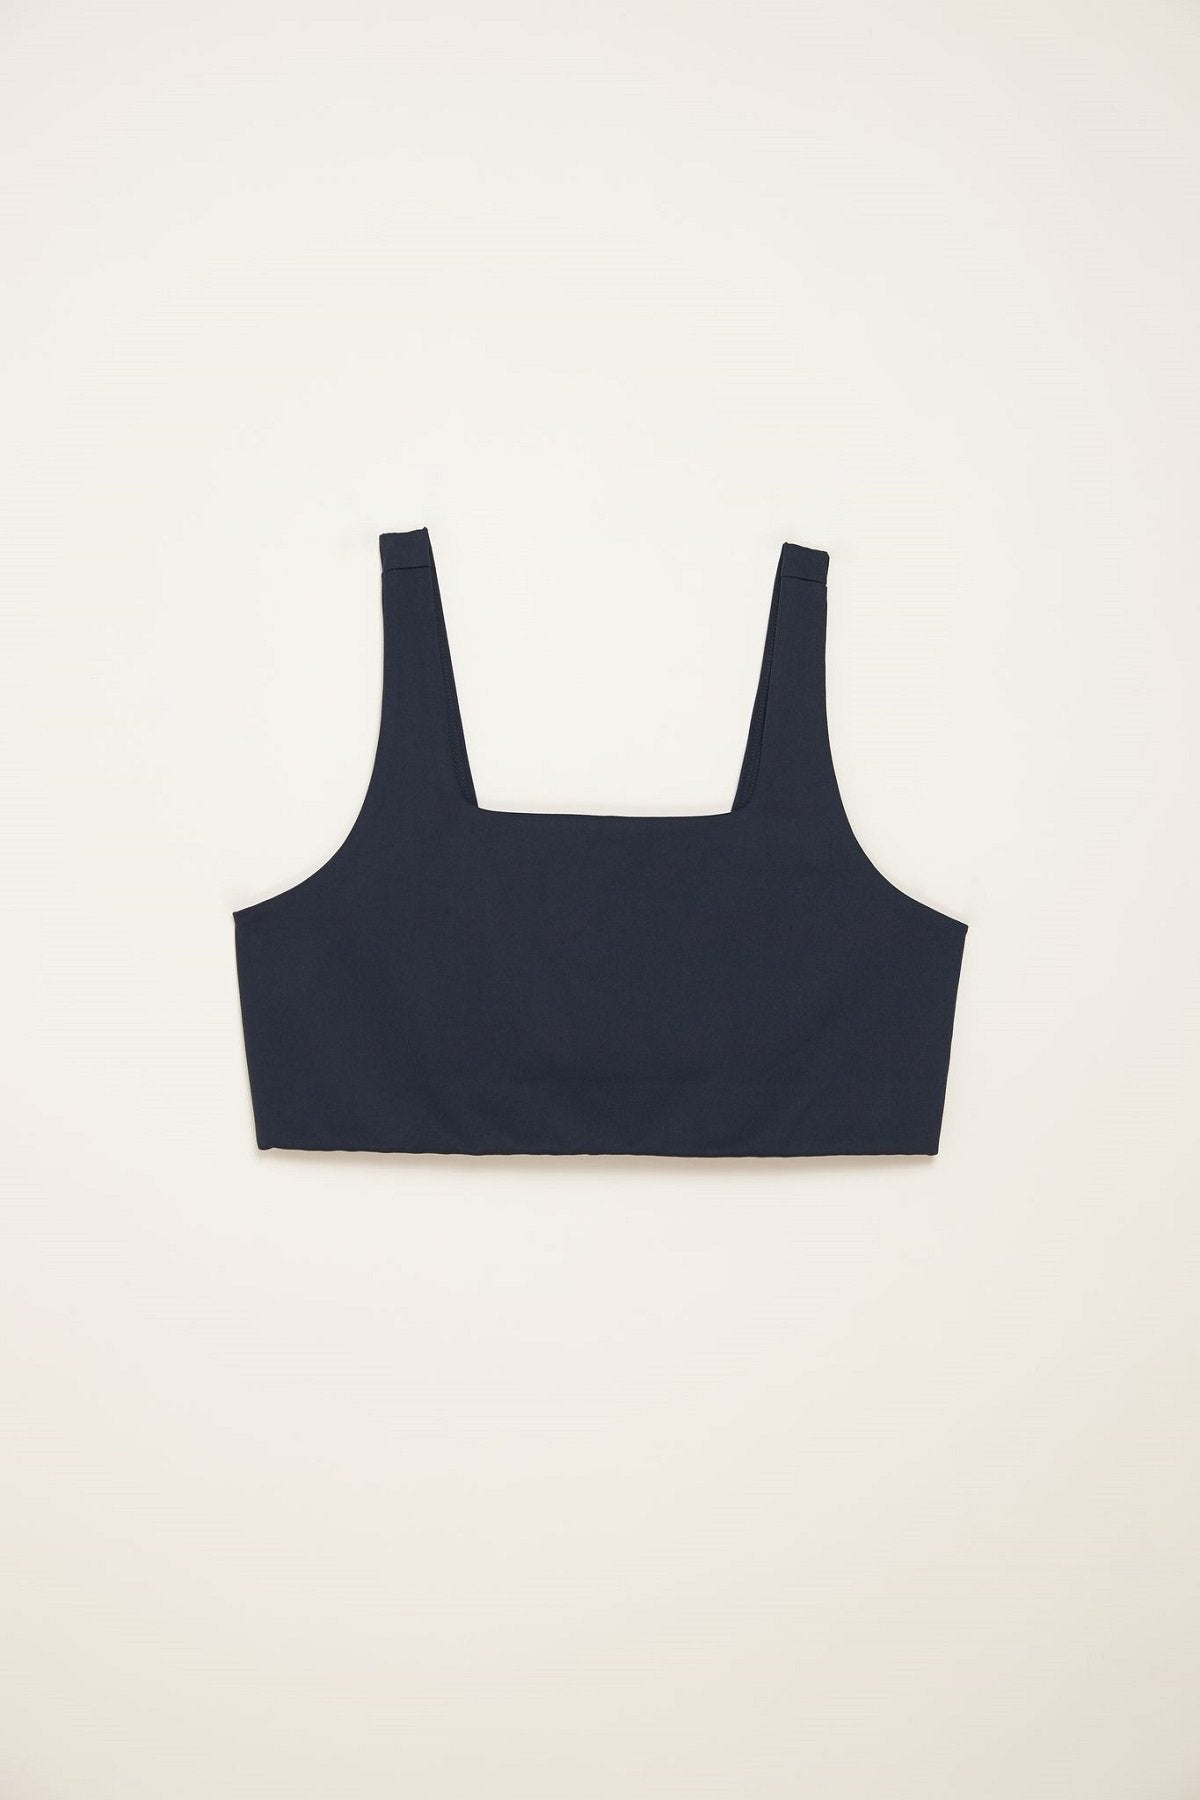 Girlfriend Collective W's Tommy Bra Square Neck - Made from Recycled Plastic Bottles Midnight Underwear